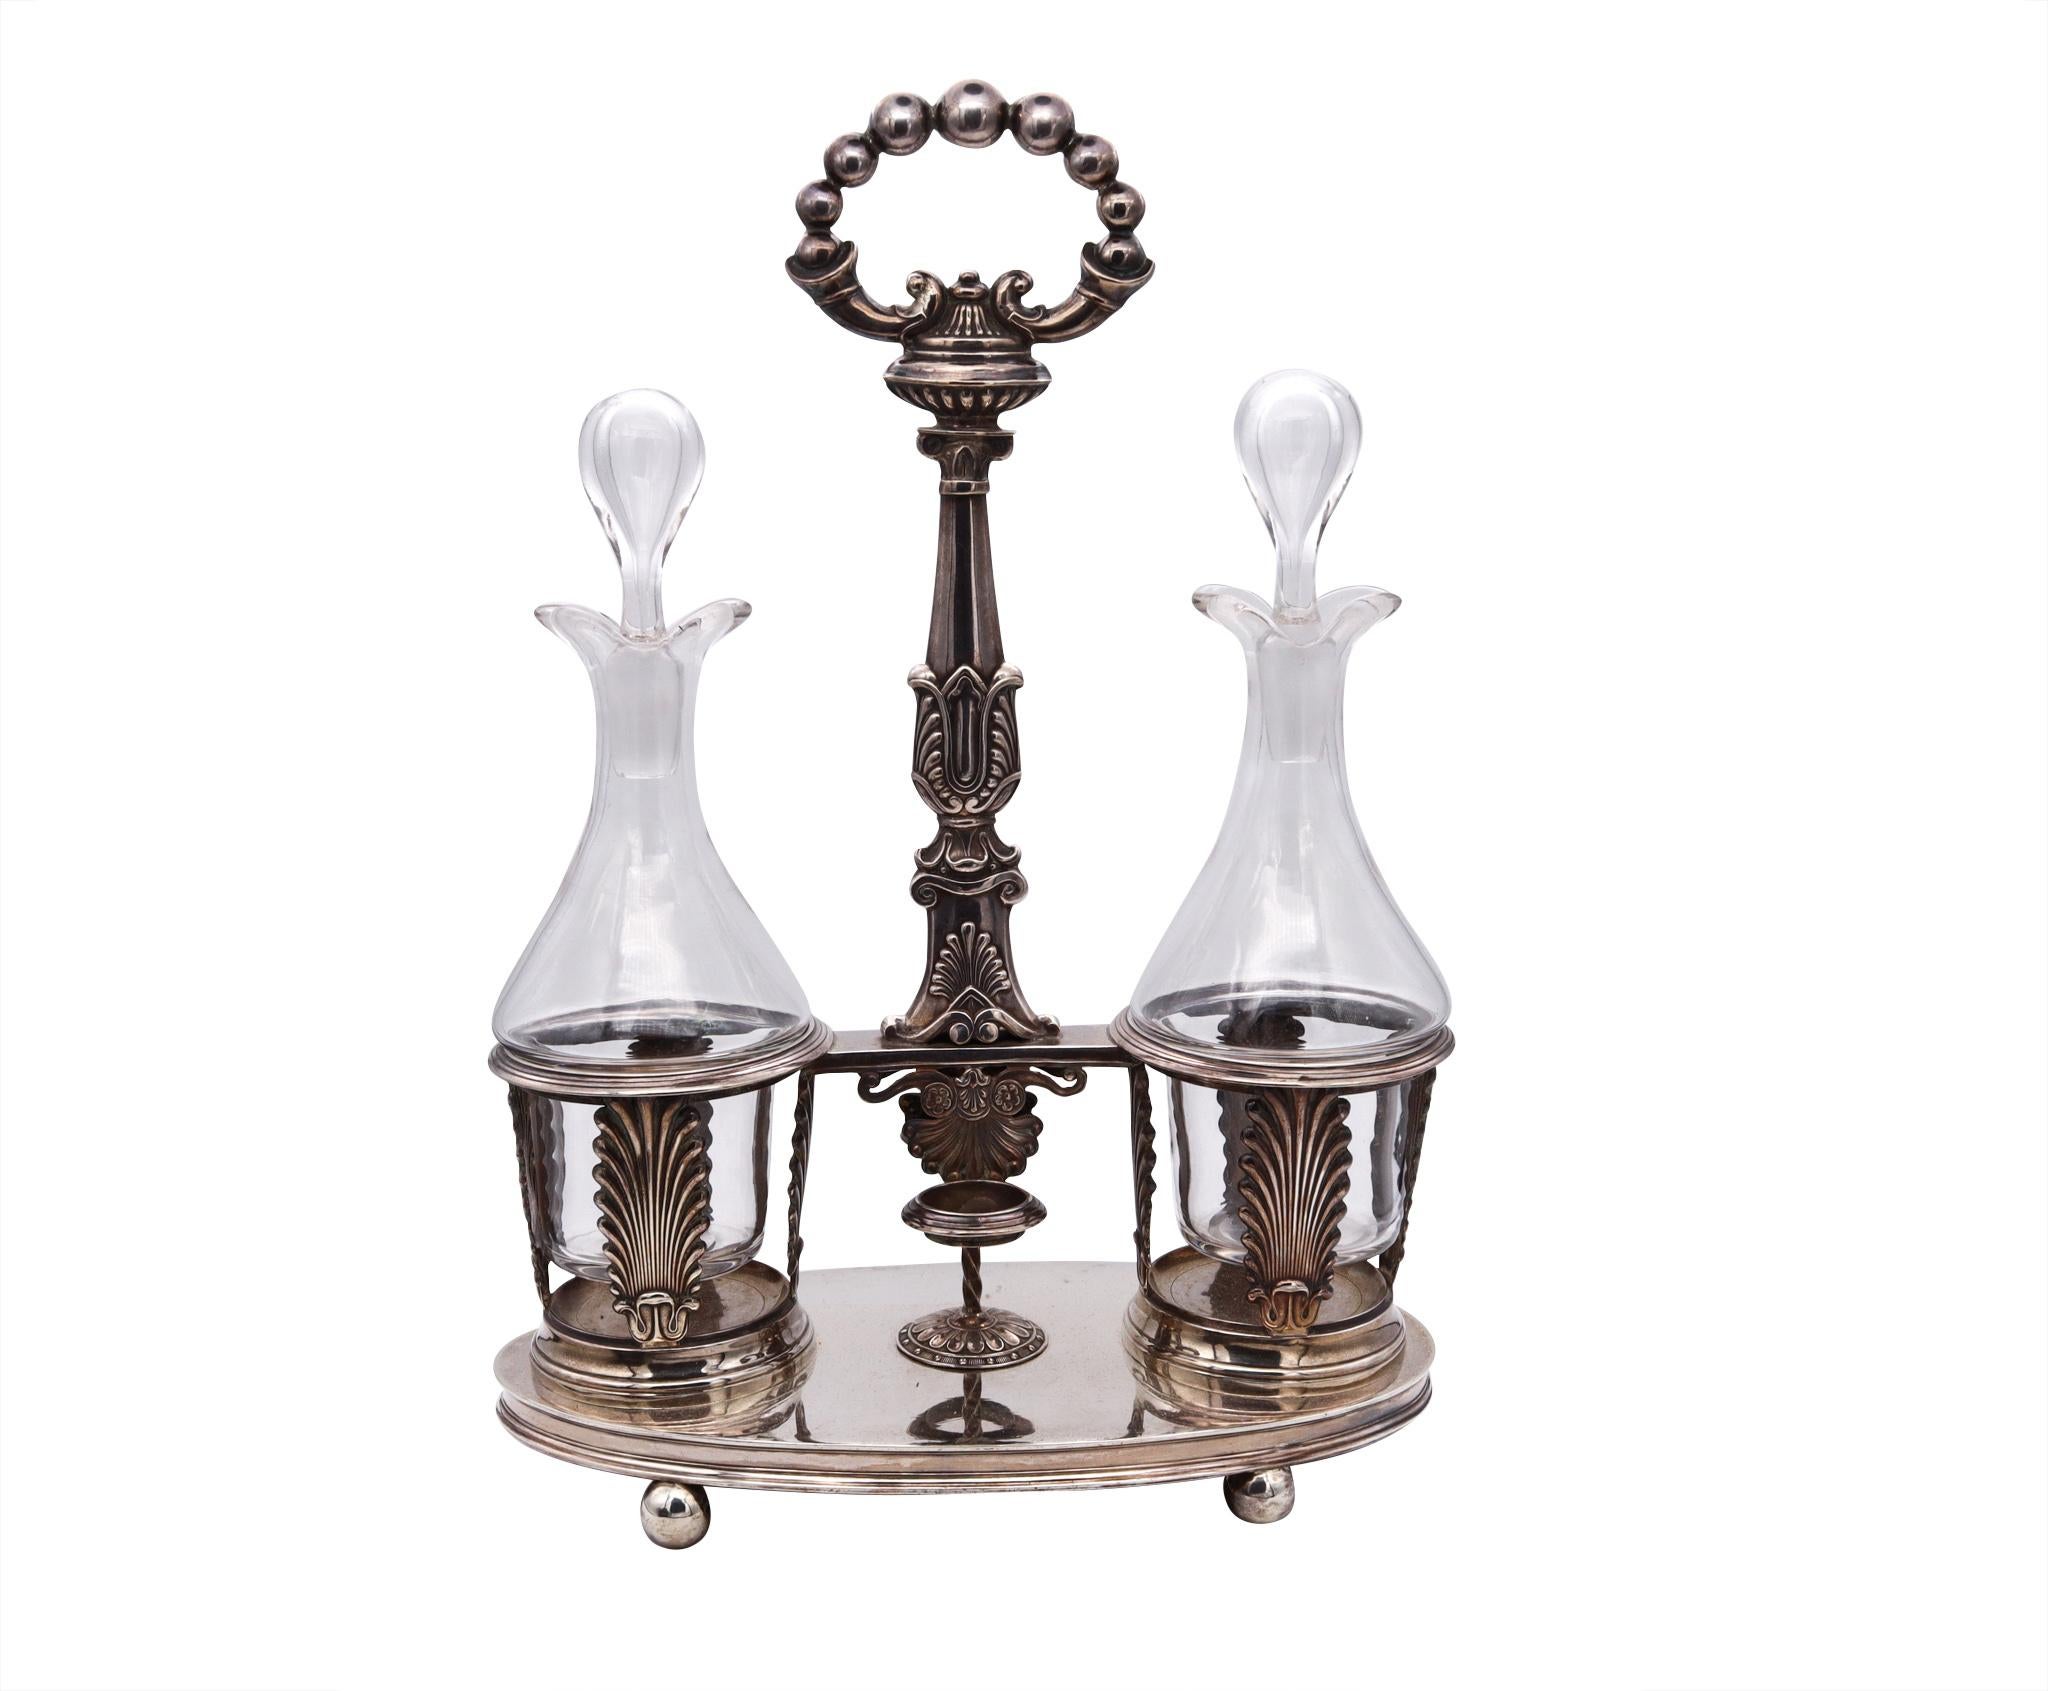 Beautiful Cruet set designed by Armand Caillat (1822-1901).

Very nice French neo-classical piece from the period of the king Louis Phillipe (1830-1848). This handsome and elegant Hoilier Cruet was crafted in the city of Lyon by silversmith Armand